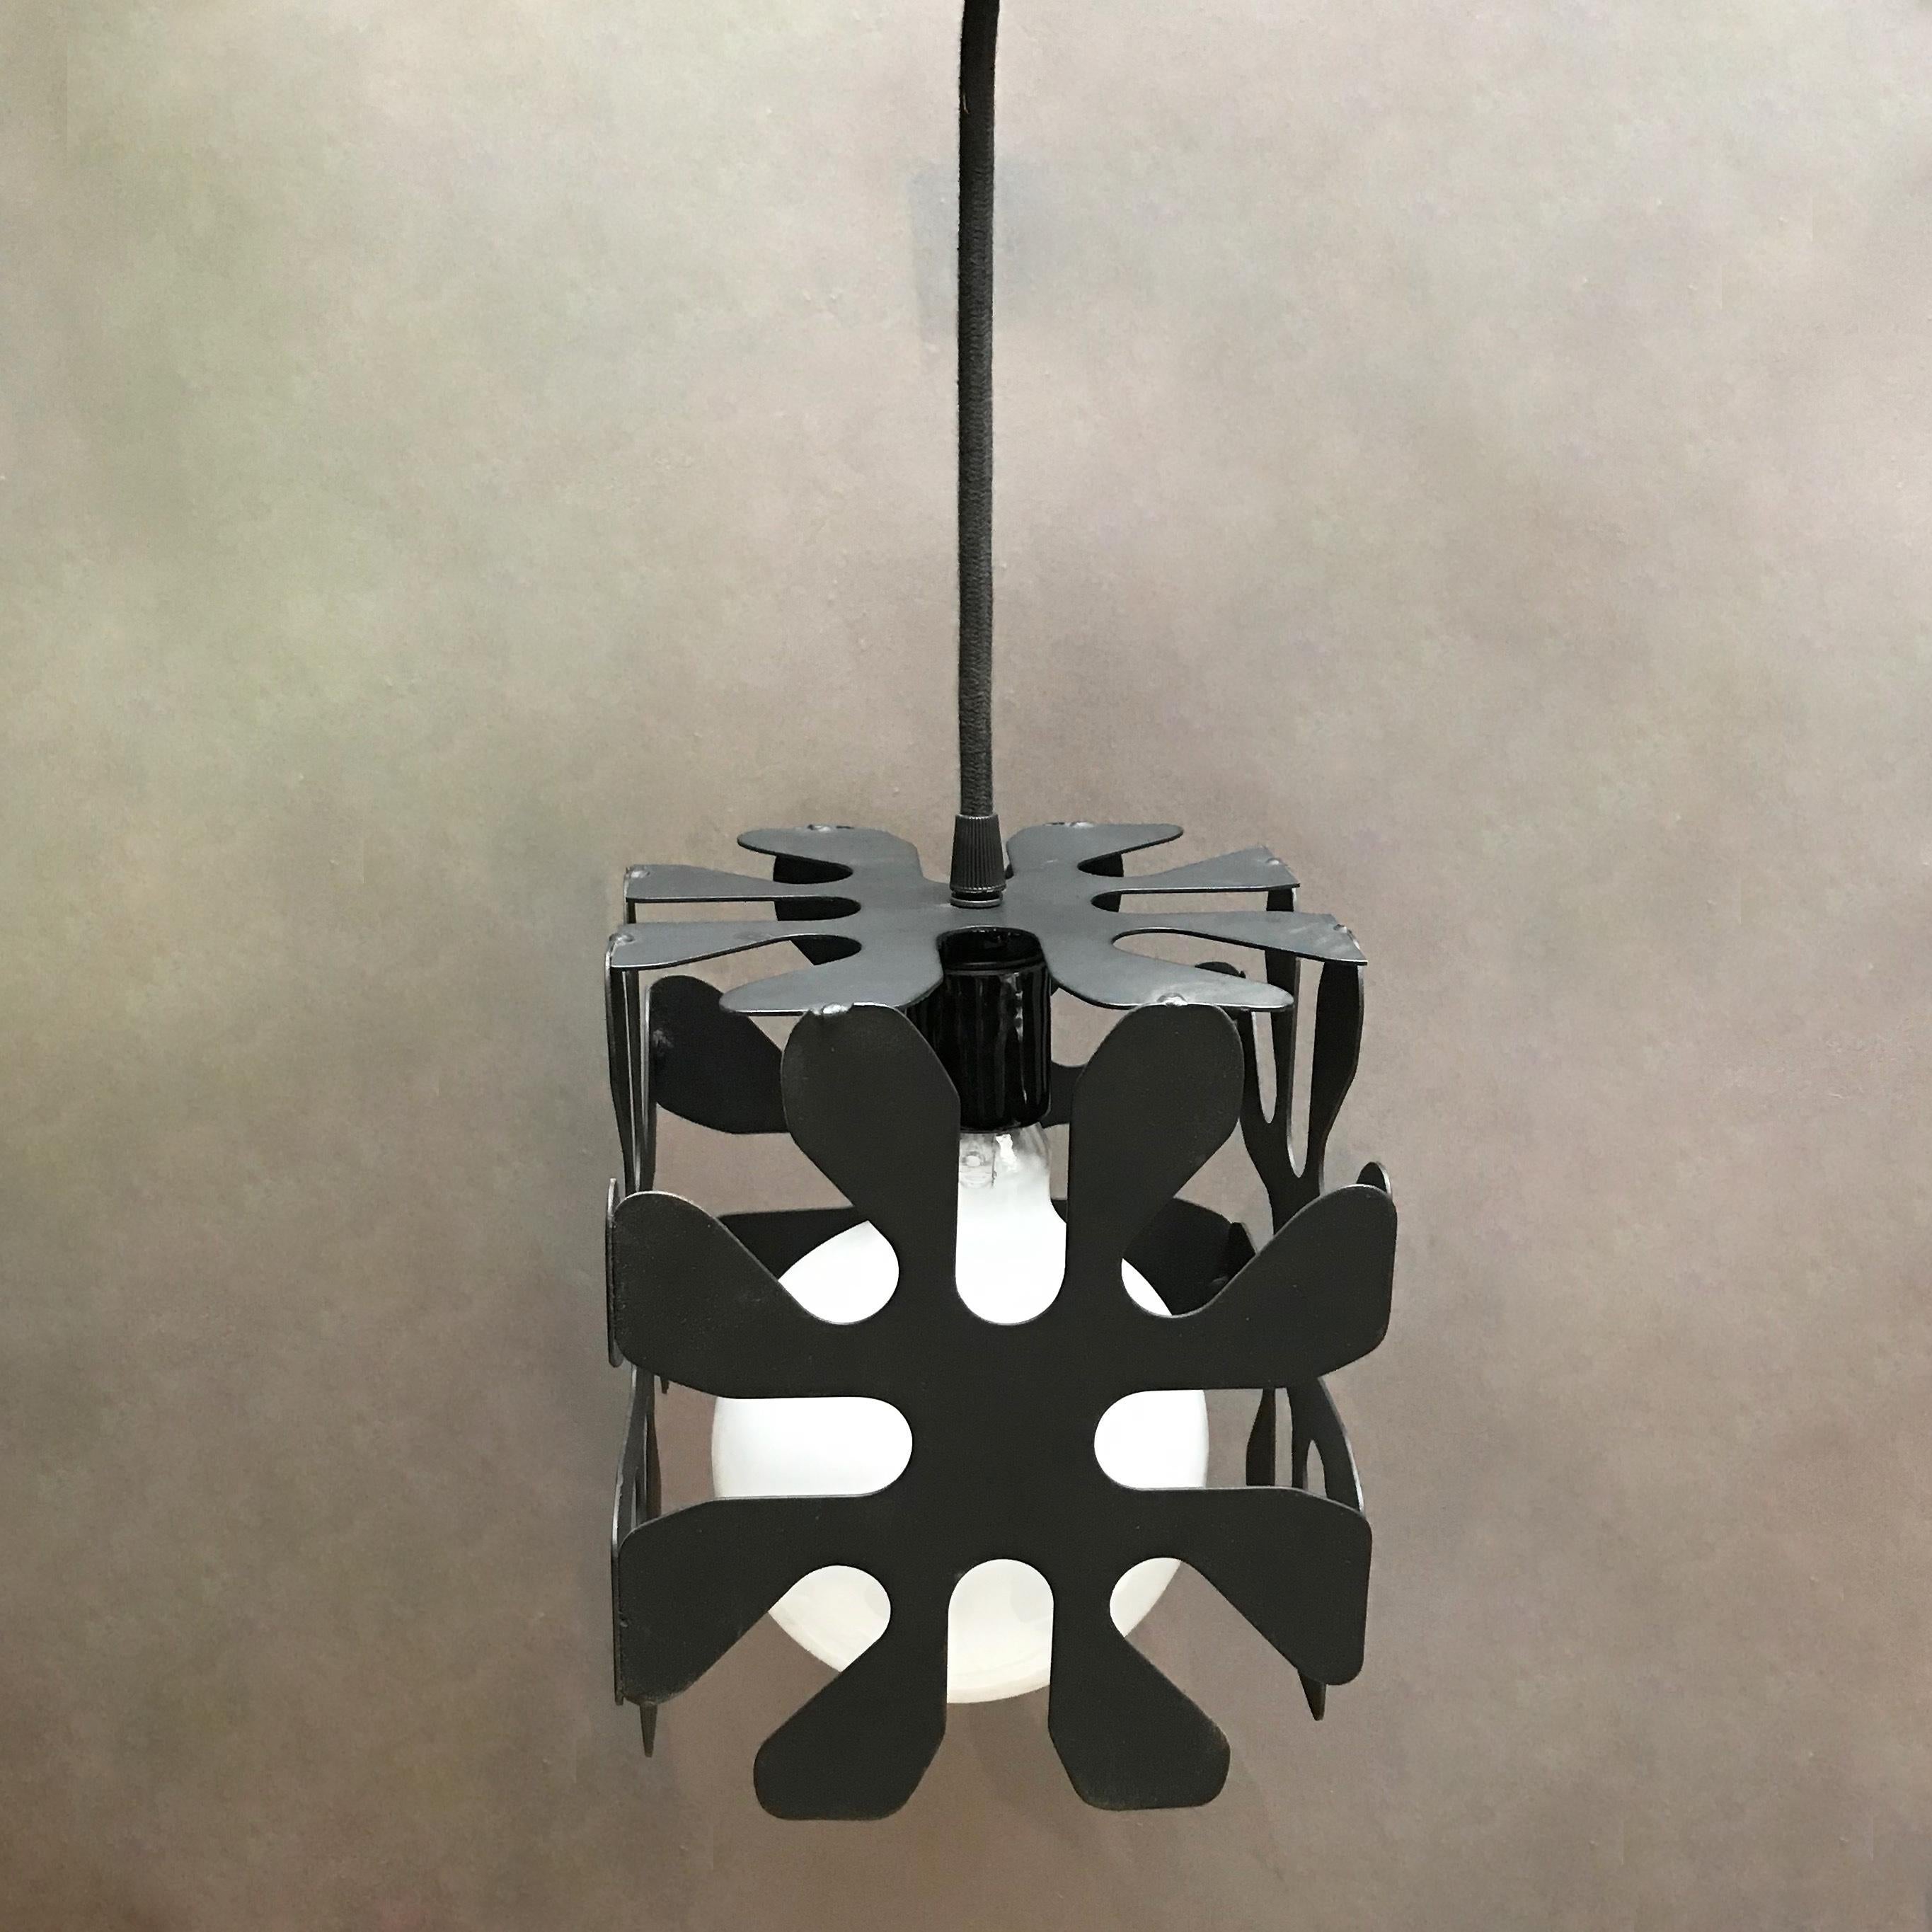 Mid-Century Modern Wrought Iron Cubed Flower Pendant Light In Good Condition For Sale In Brooklyn, NY